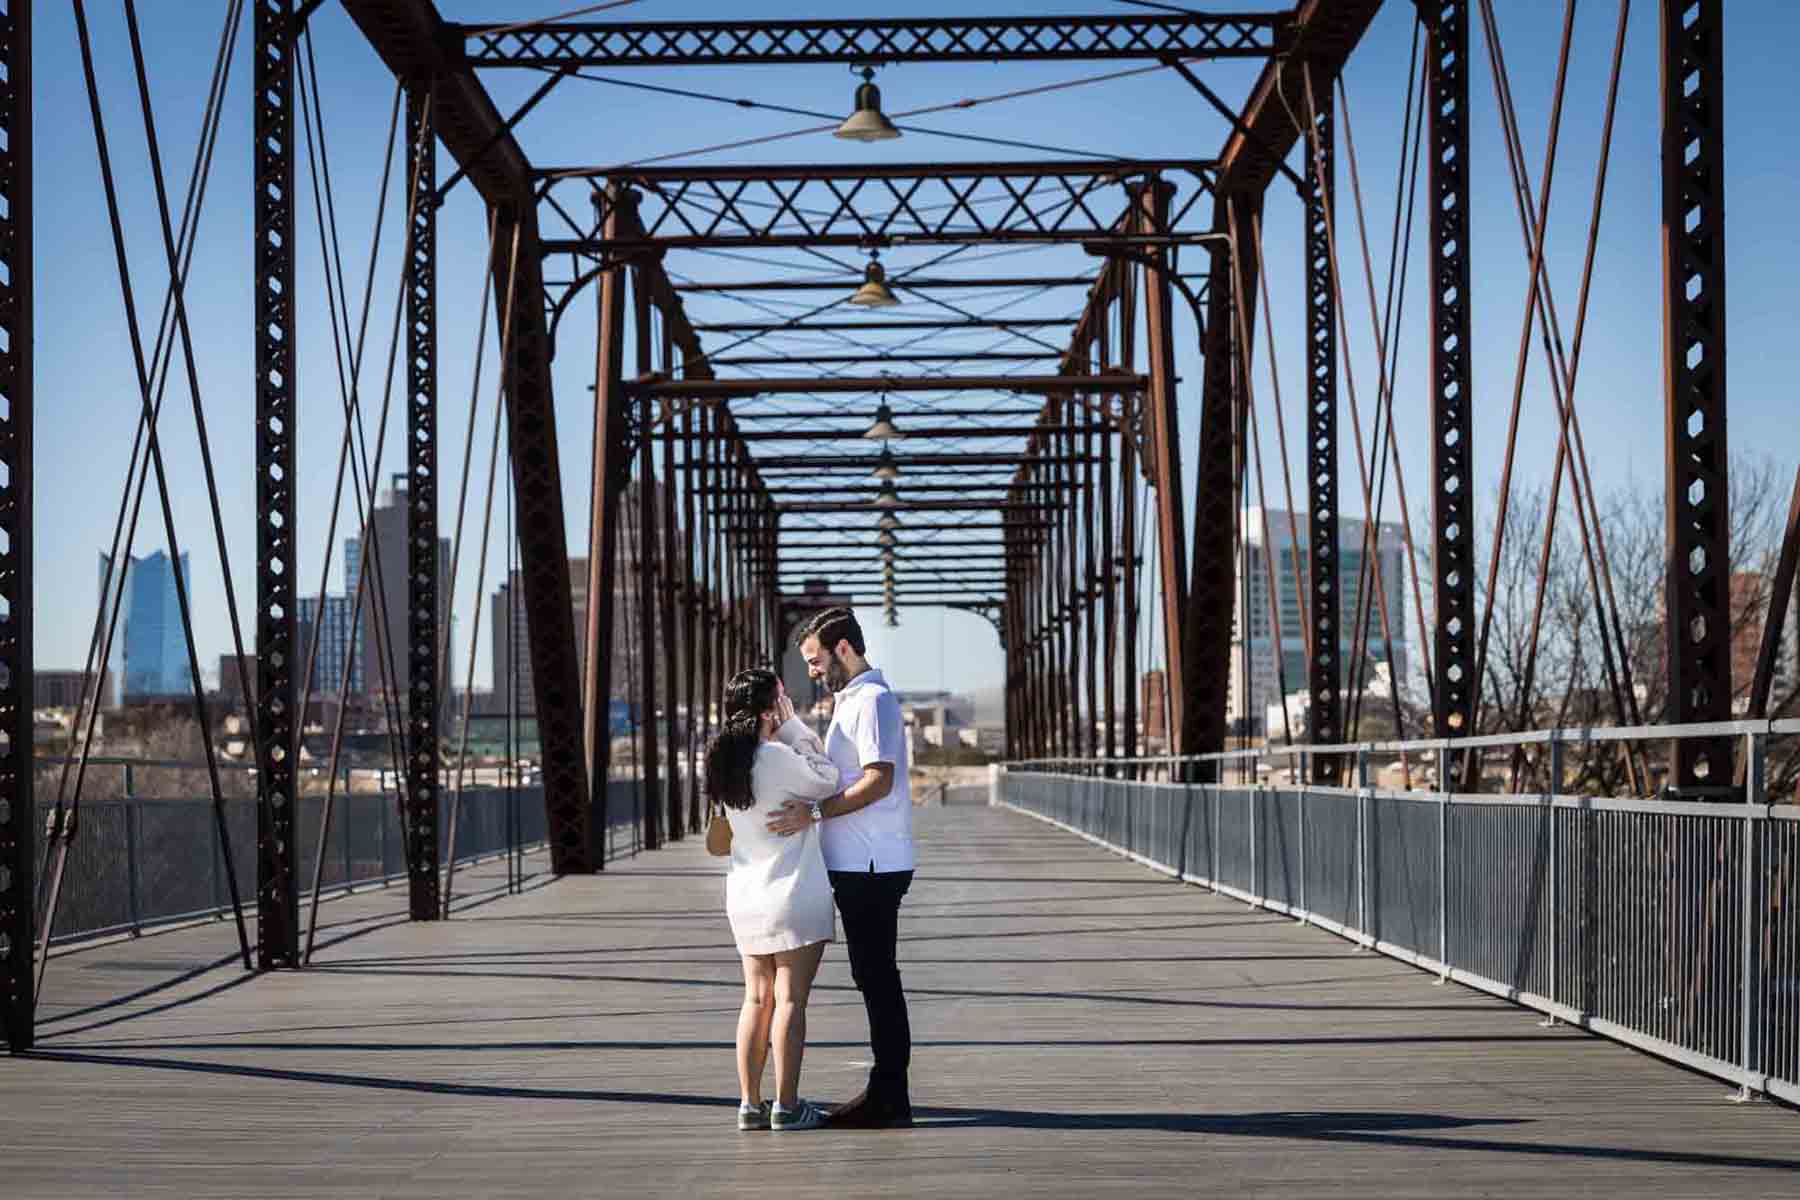 Couple hugging in middle of bridge for a Hays Street Bridge proposal